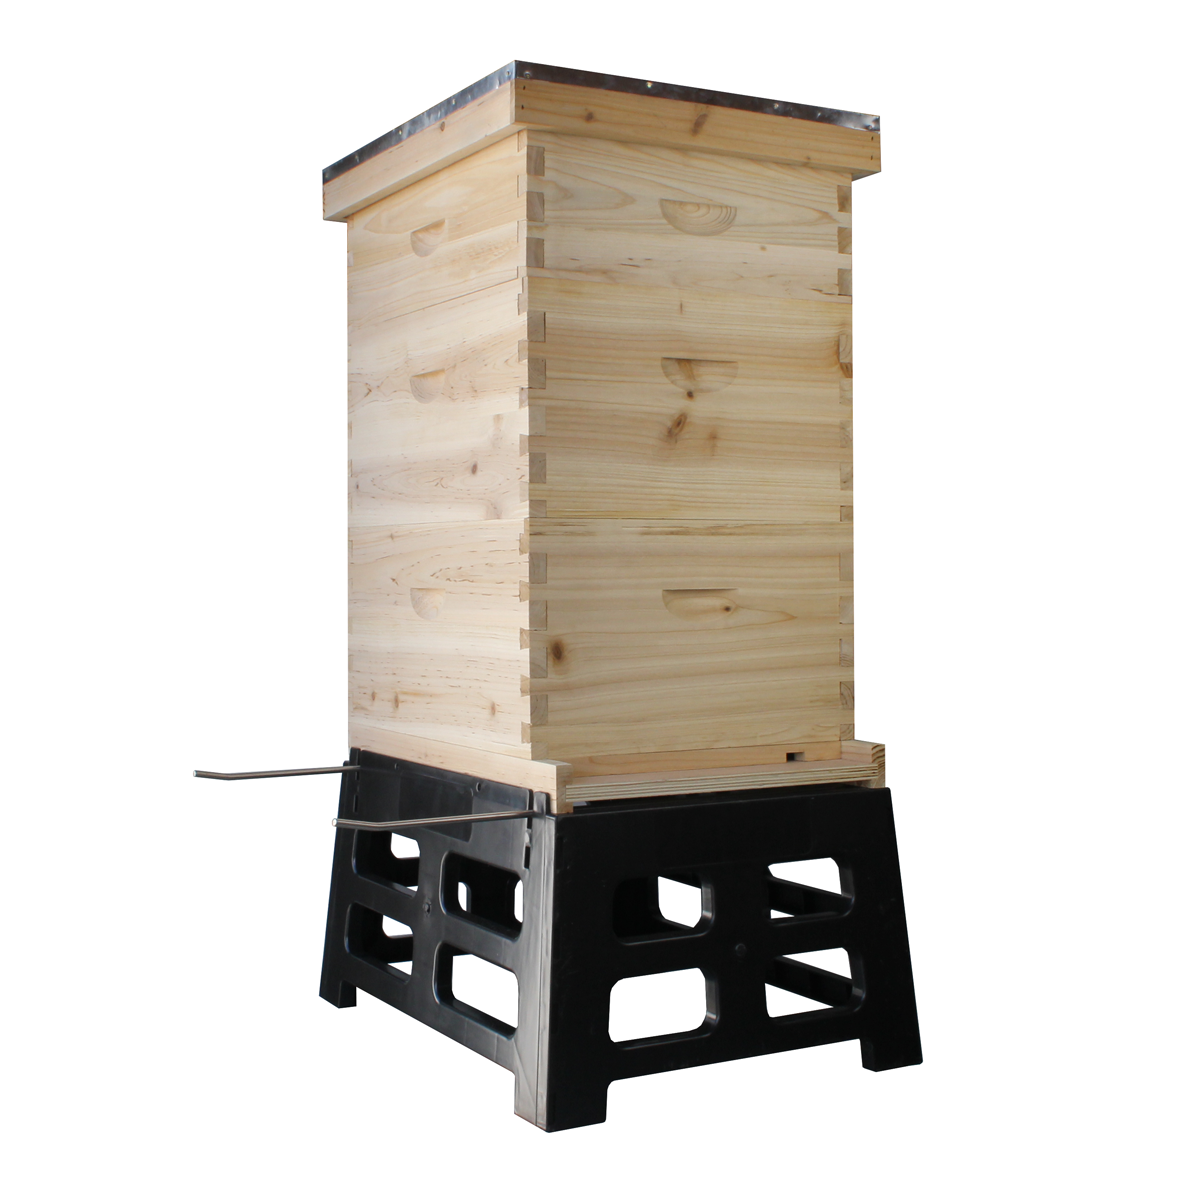 Black Plastic Hive Stand 12" Tall With 2 Metal Rods Coming Out The Side To Hold Beehive Frames On Top Is A 2 Deep 1 Medium